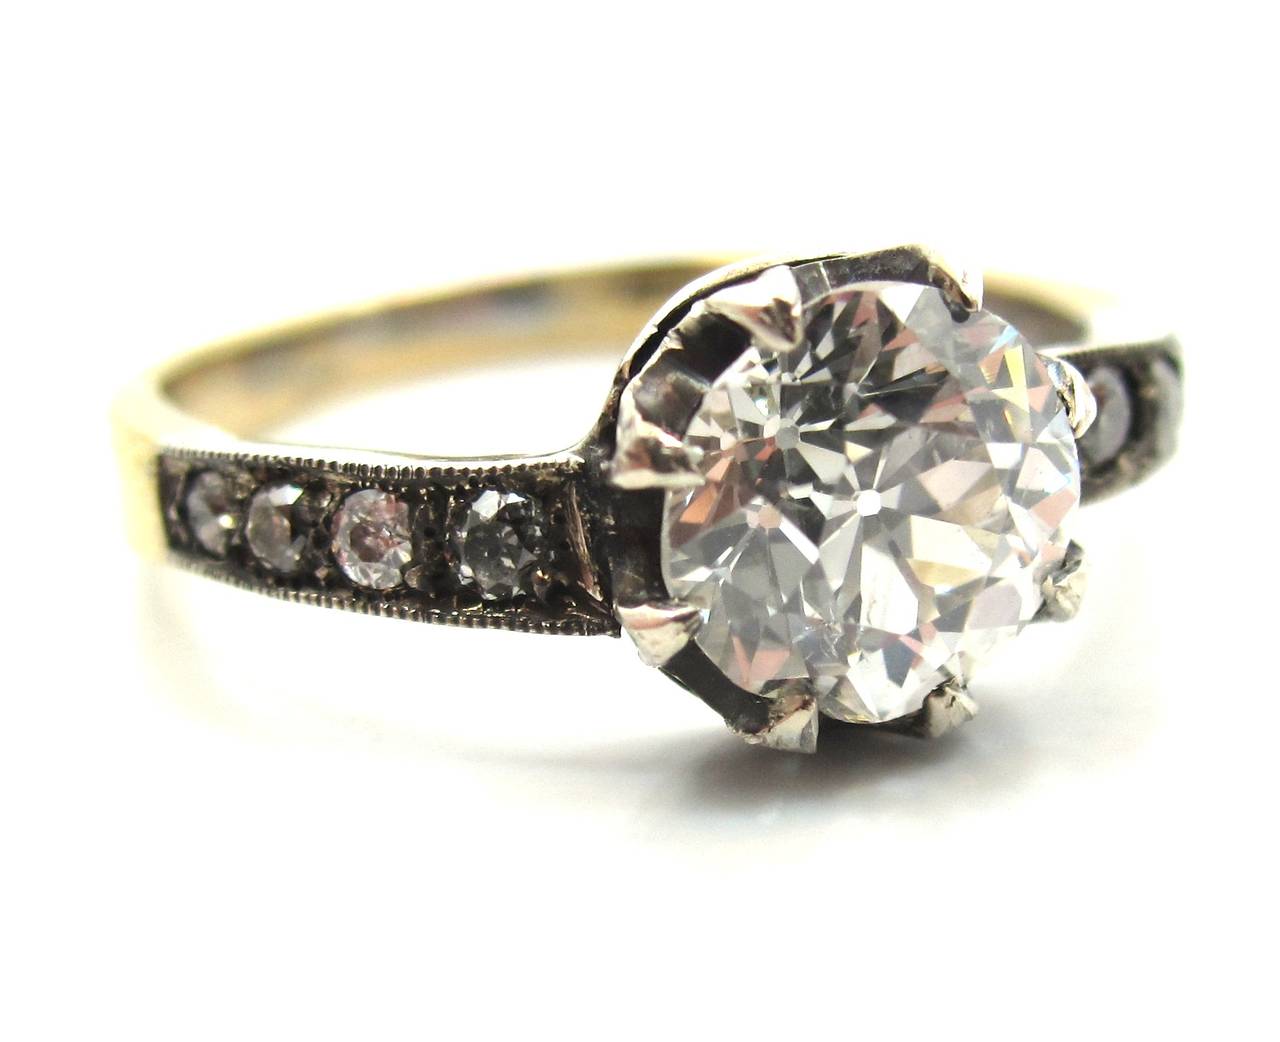 A rare example of an early French Edwardian (circa 1905) mixed metal engagement ring.
Handcrafted in 18 karat yellow gold with a silver top. Featuring a center stone 1.25 Carat Old European Cut diamond. Delicately claw prong set in a 